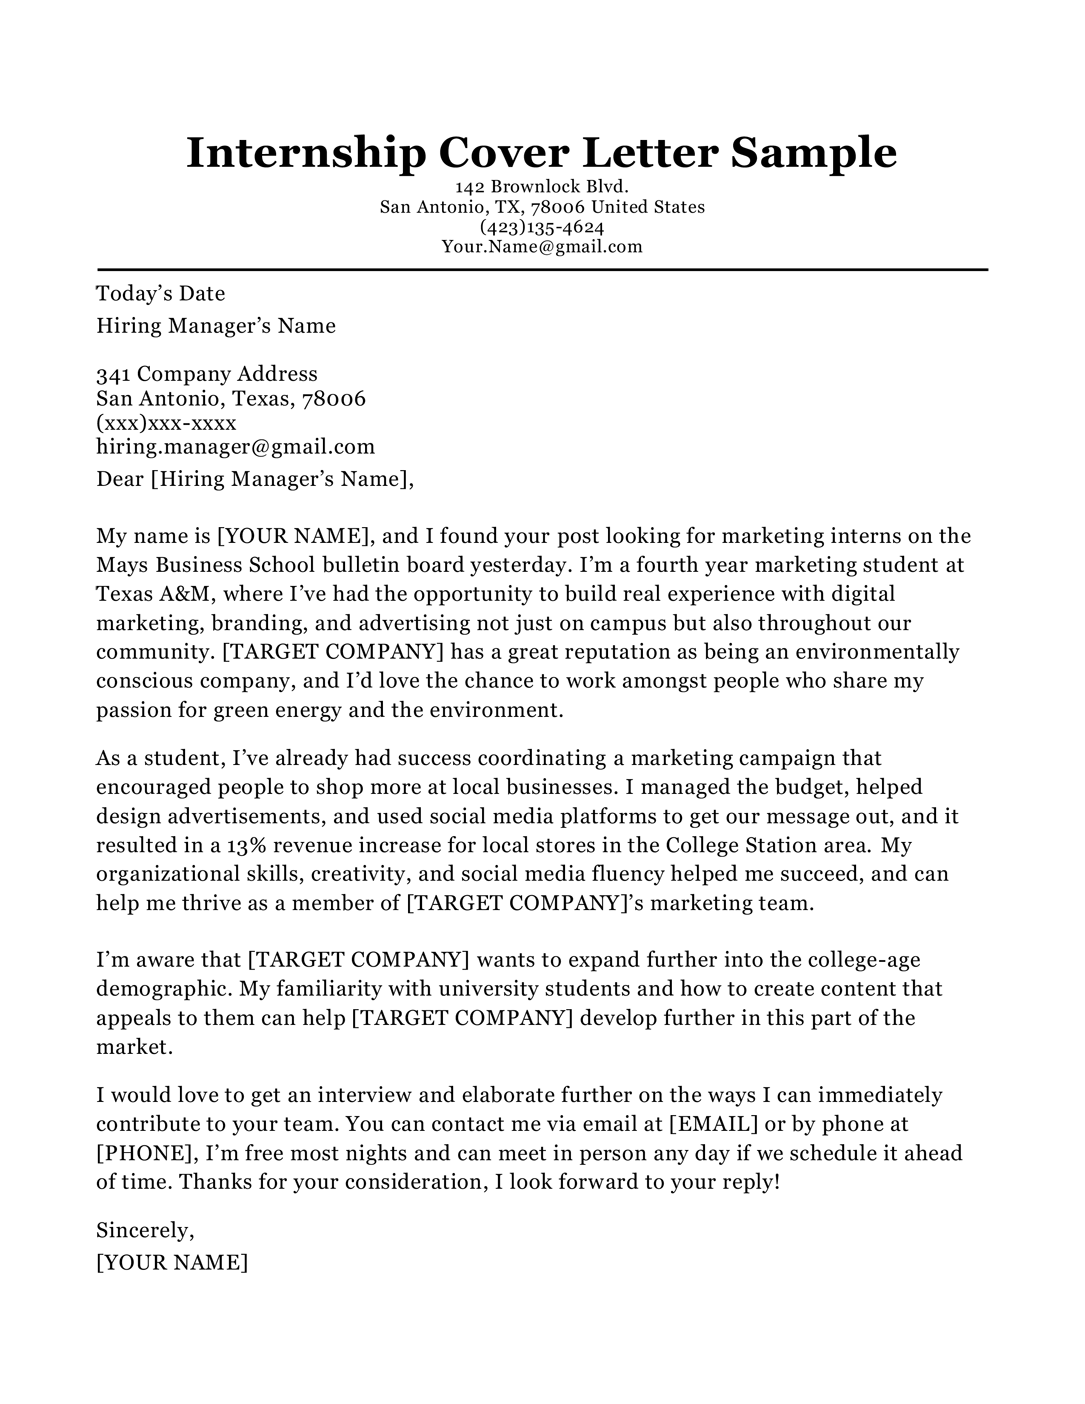 College Grad Cover Letter Samples from resumecompanion.com